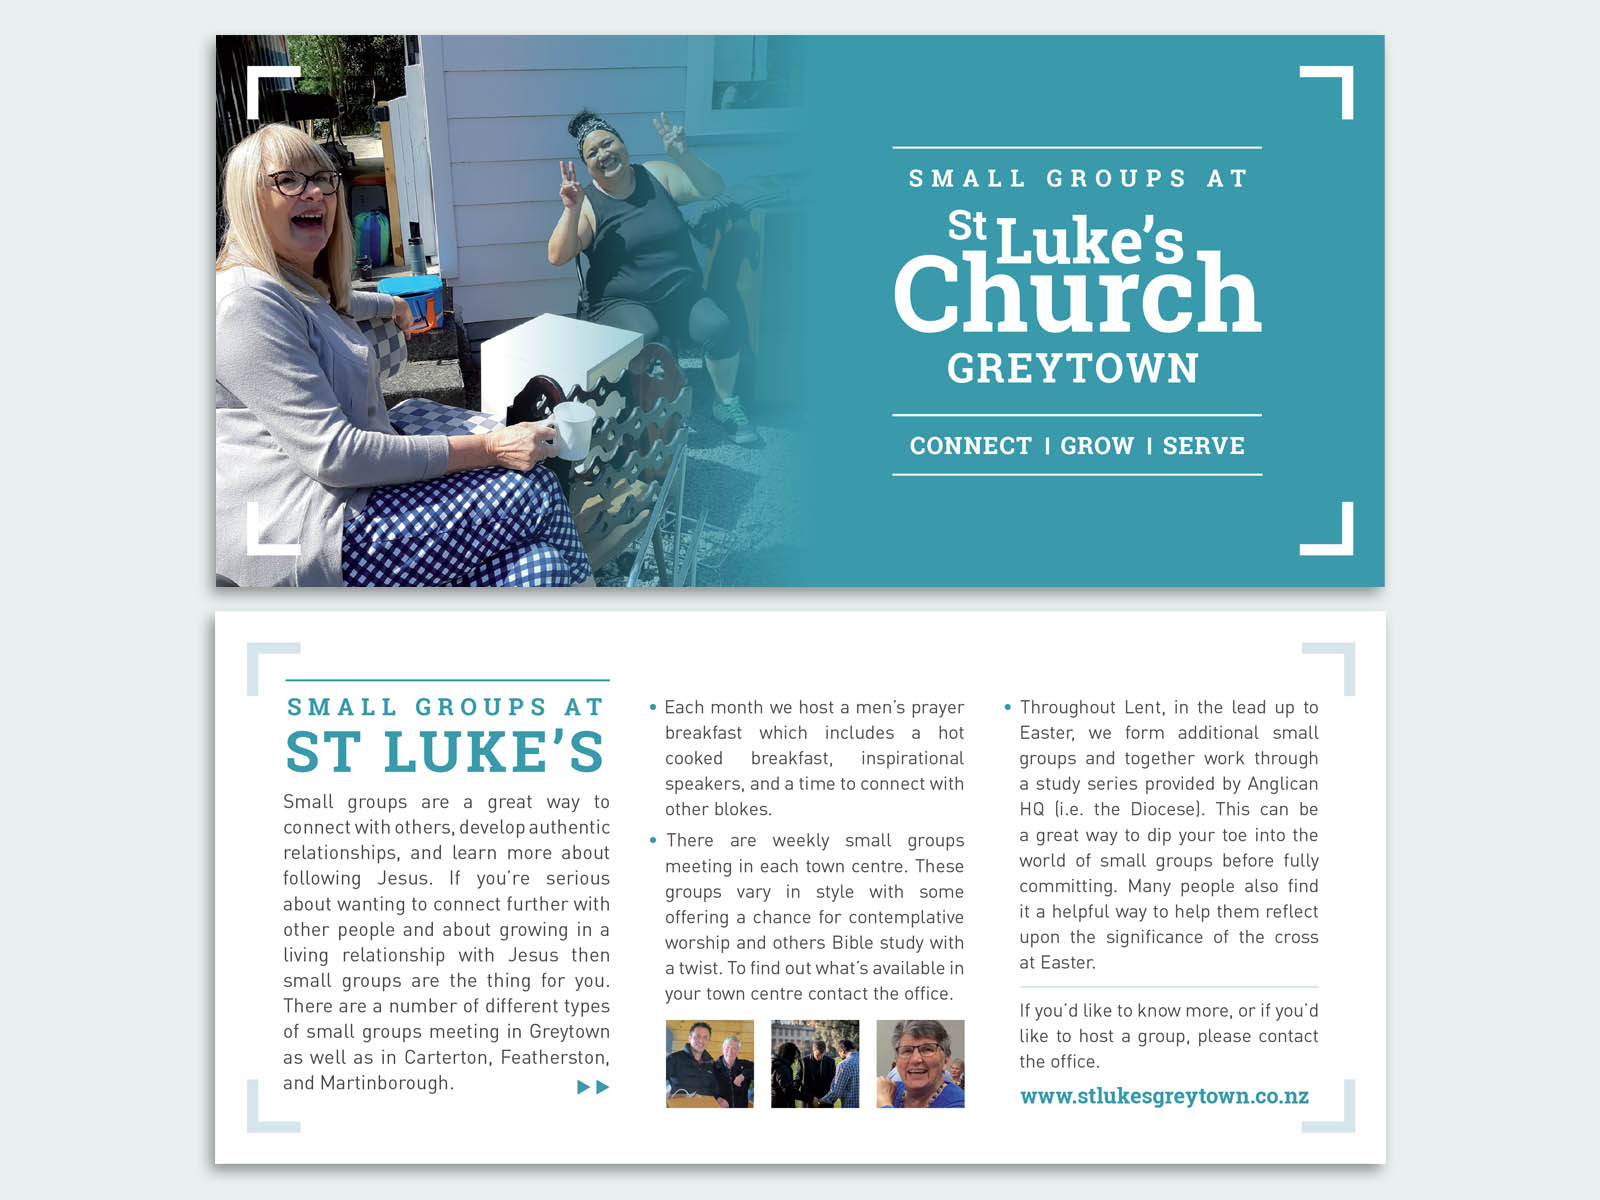 St Luke's church flyer which talks about small groups at St Lukes church Greytown.